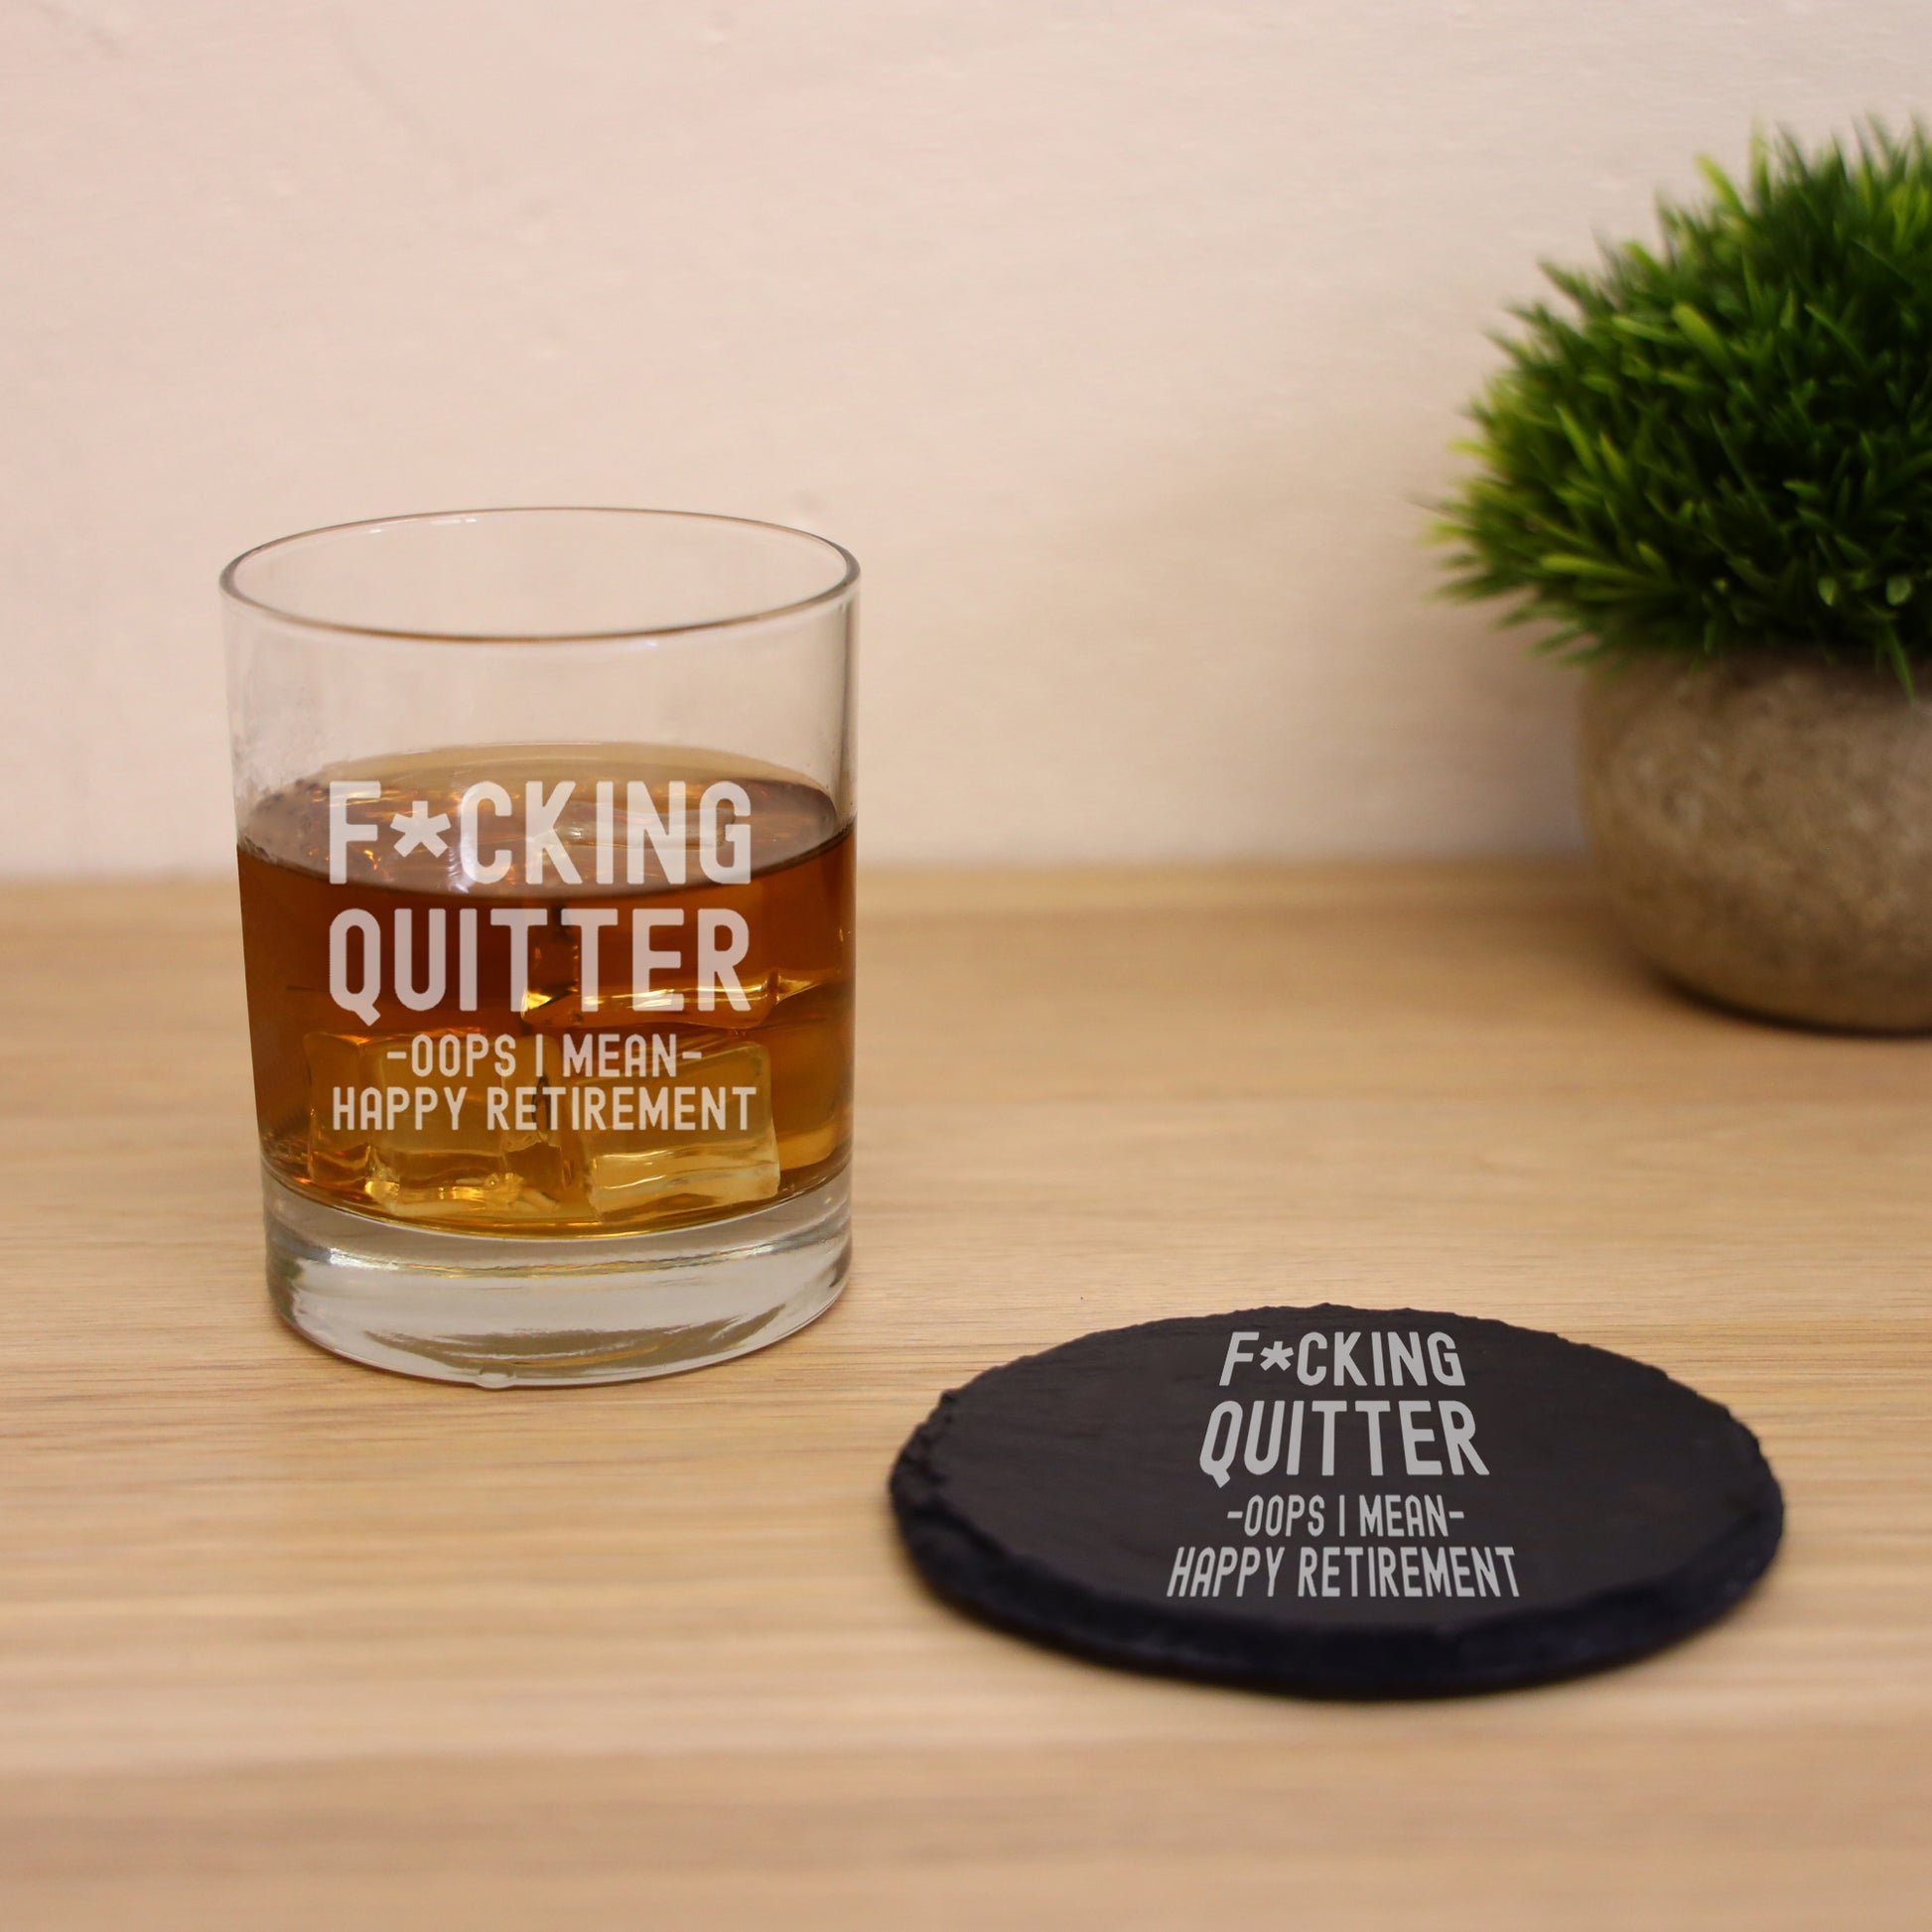 Engraved Funny "F*cking Quitter, Oops I mean Happy Retirement" Whisky Glass and/or Coaster Novelty Gift  - Always Looking Good - Glass & Round Coaster  